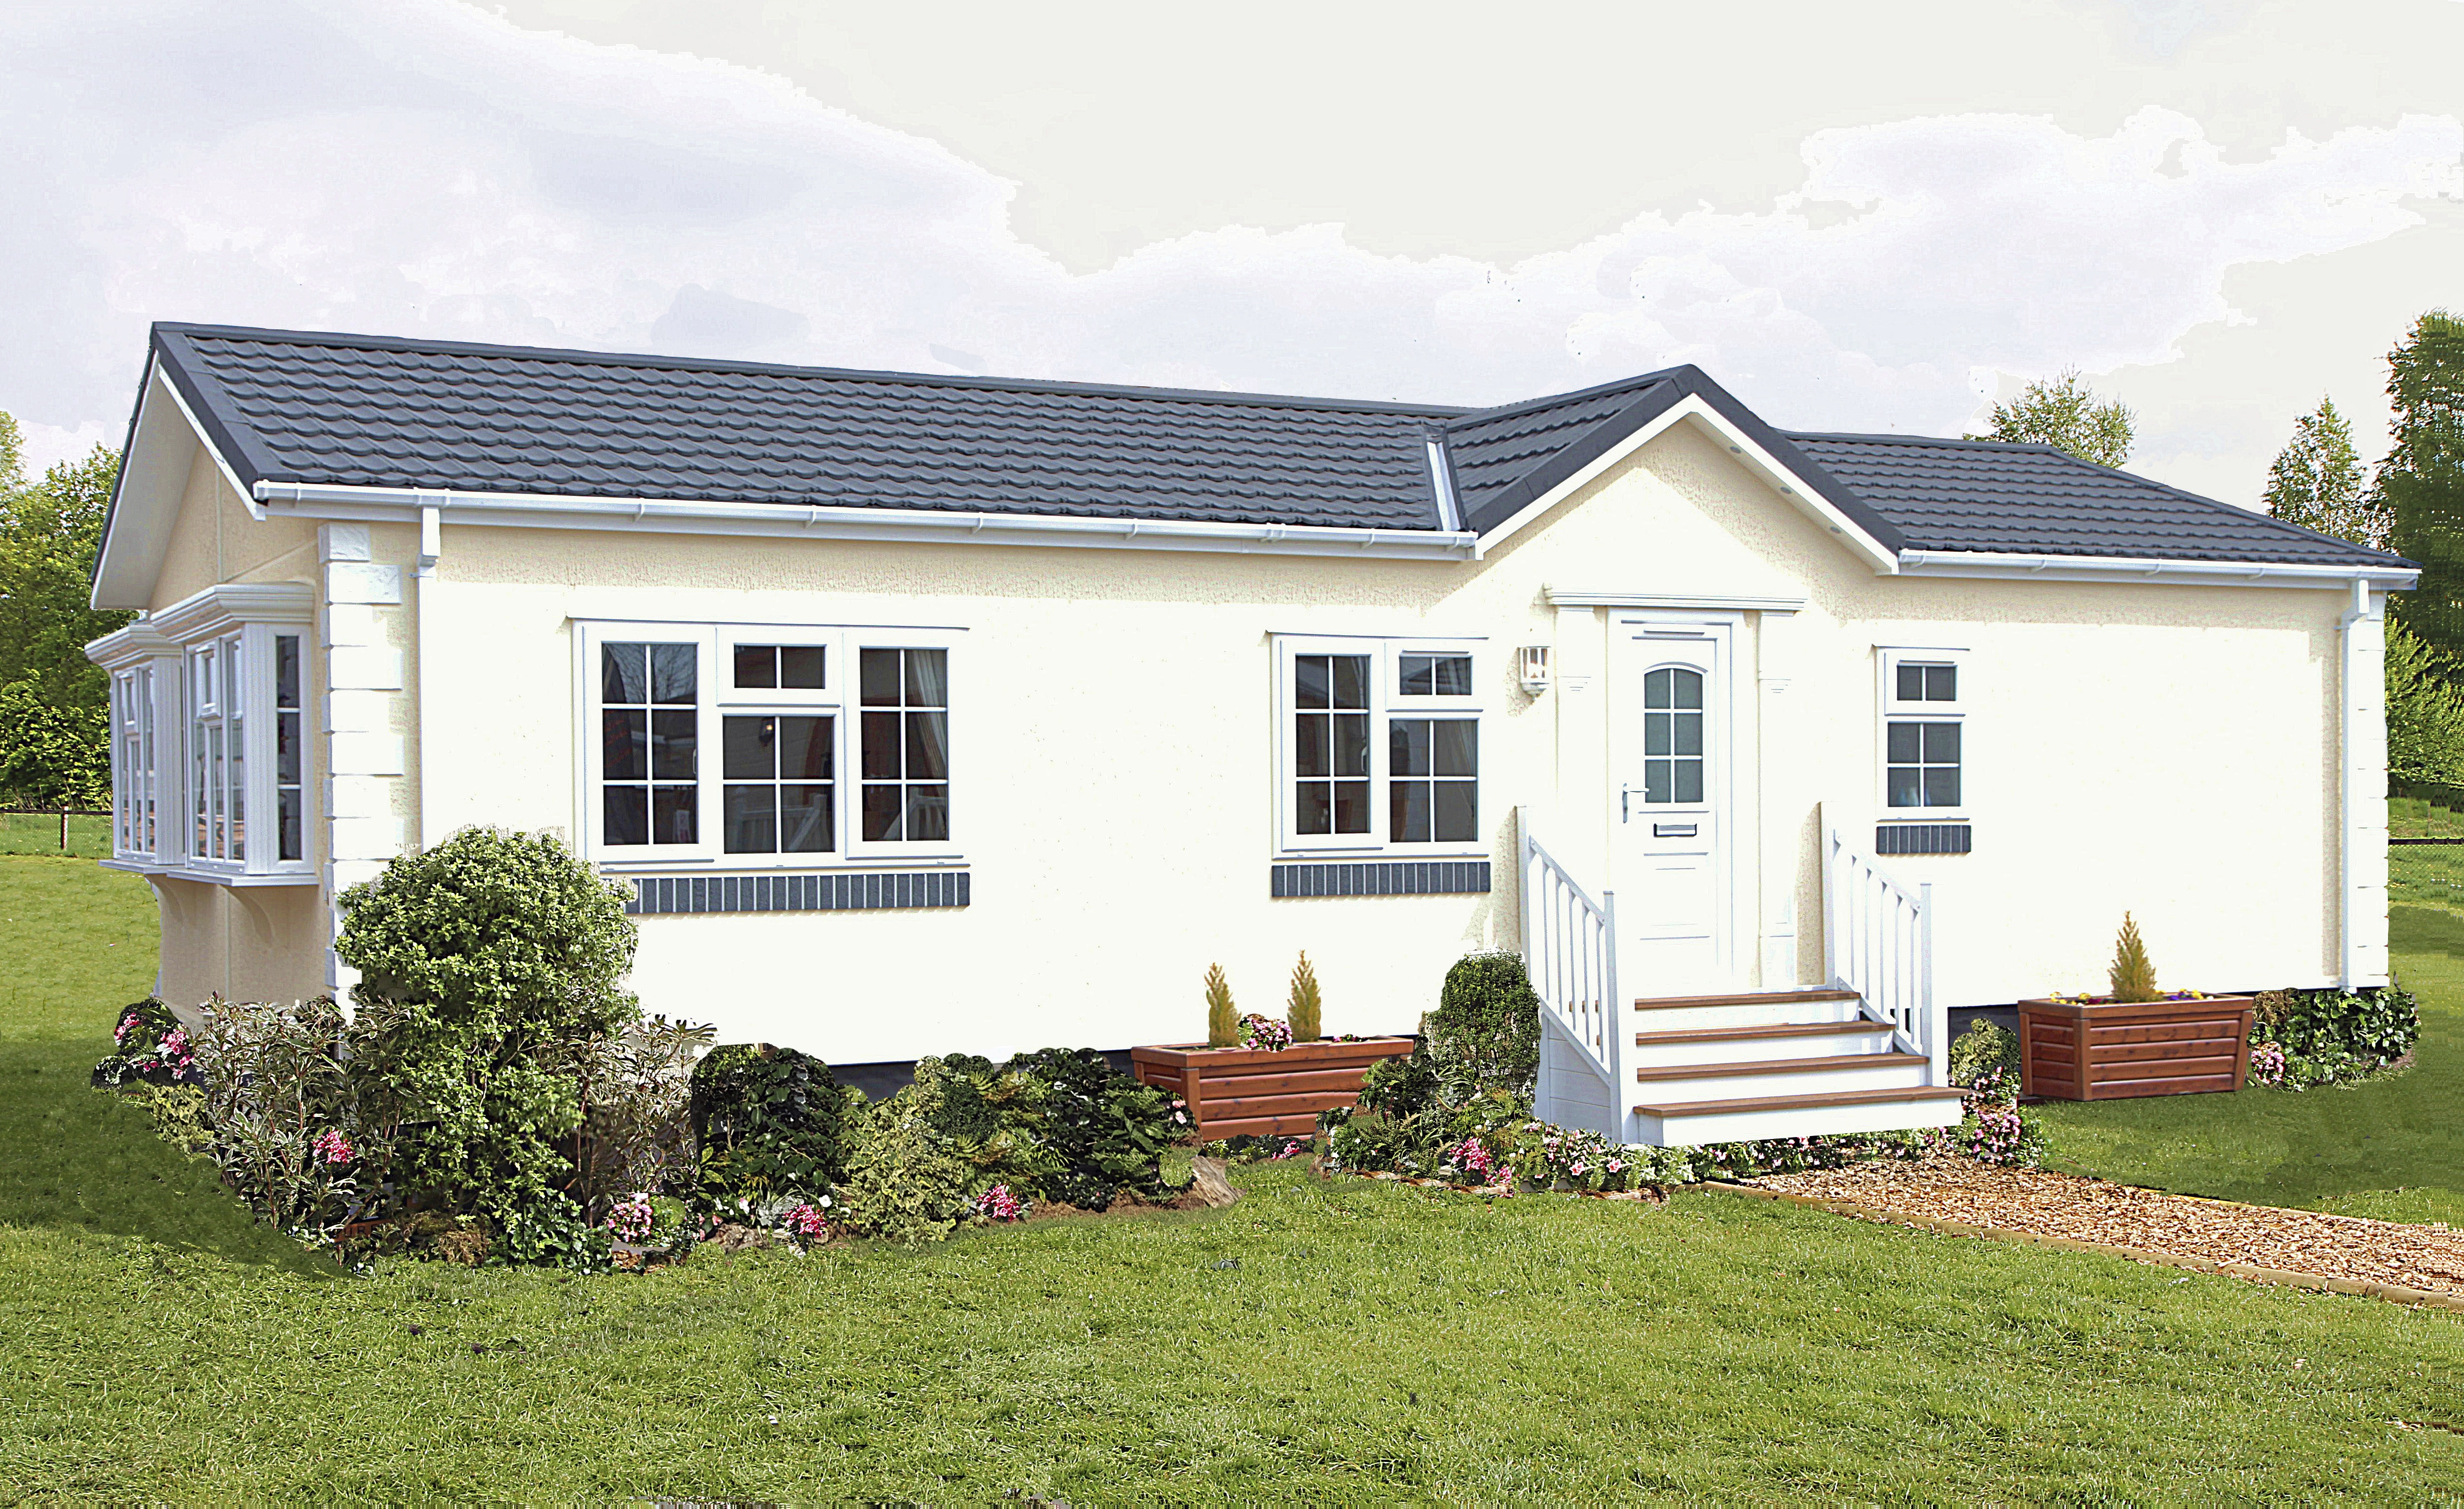 holiday home insurance